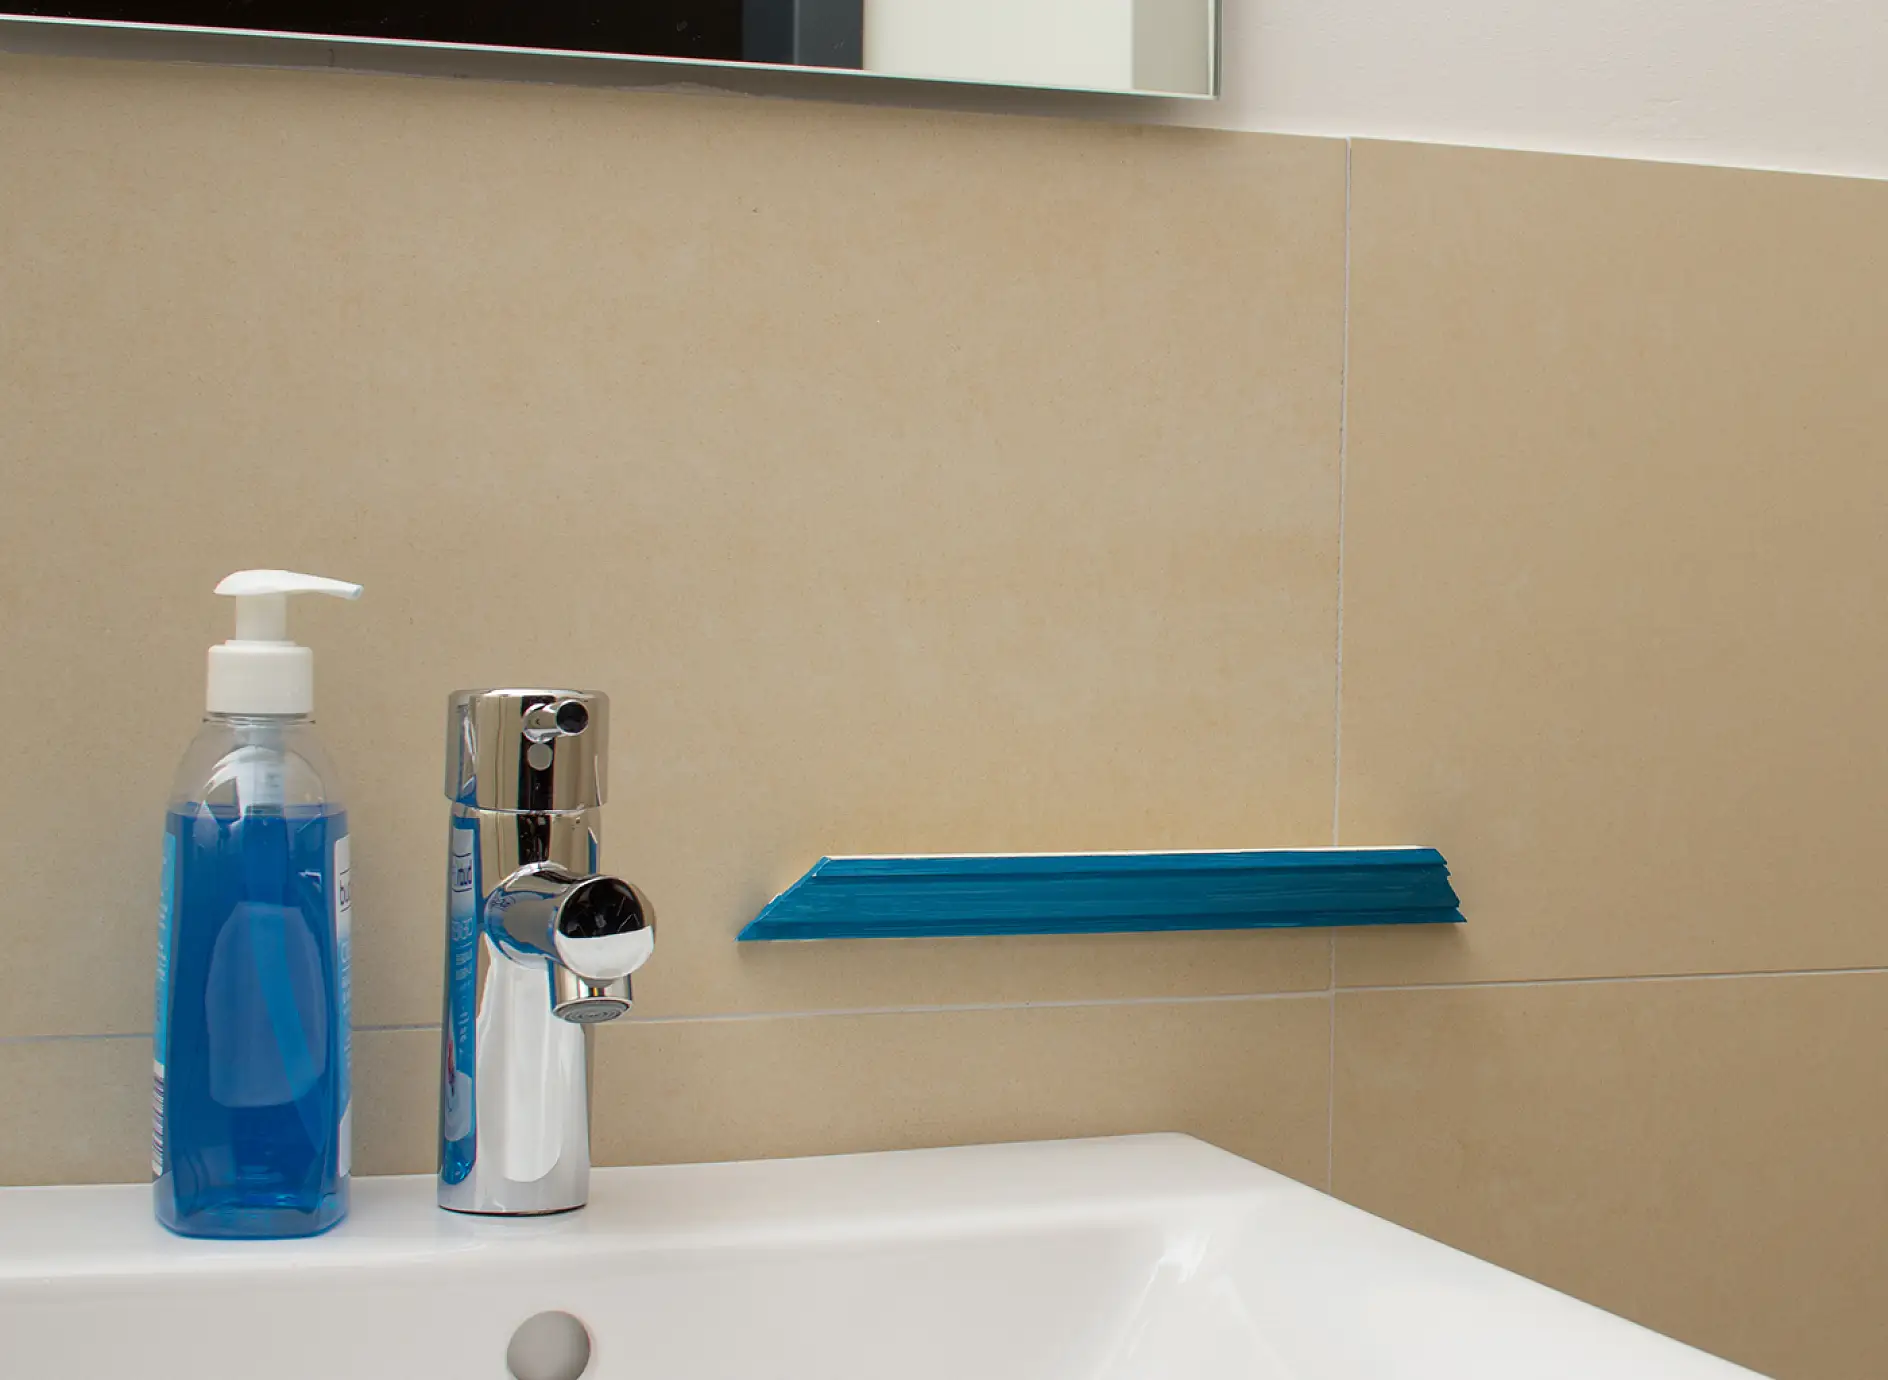 Plaster molding is attached with tesa Powerbond® MIRROR on the bathroom tiles